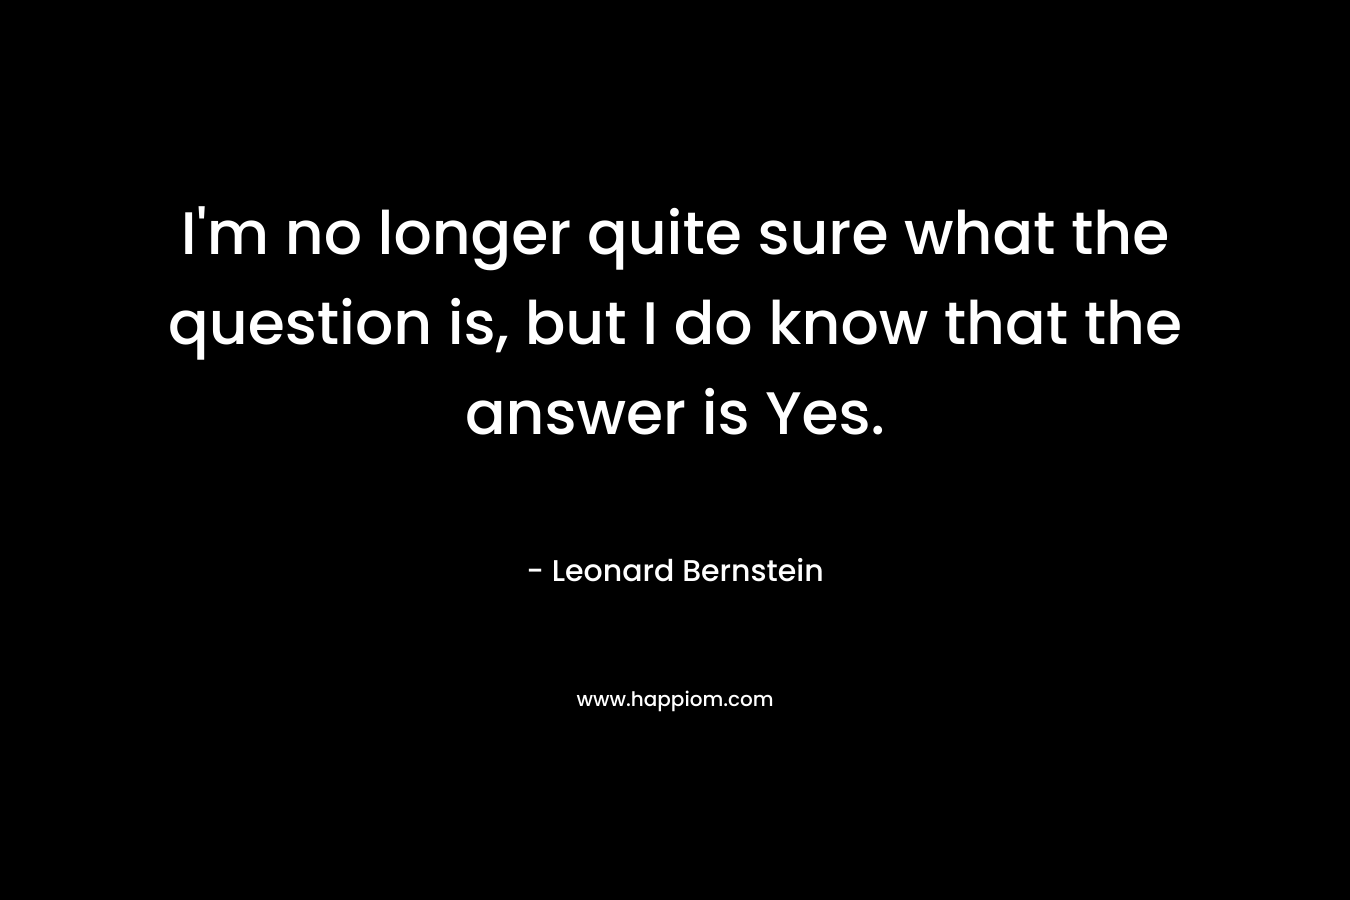 I’m no longer quite sure what the question is, but I do know that the answer is Yes. – Leonard Bernstein